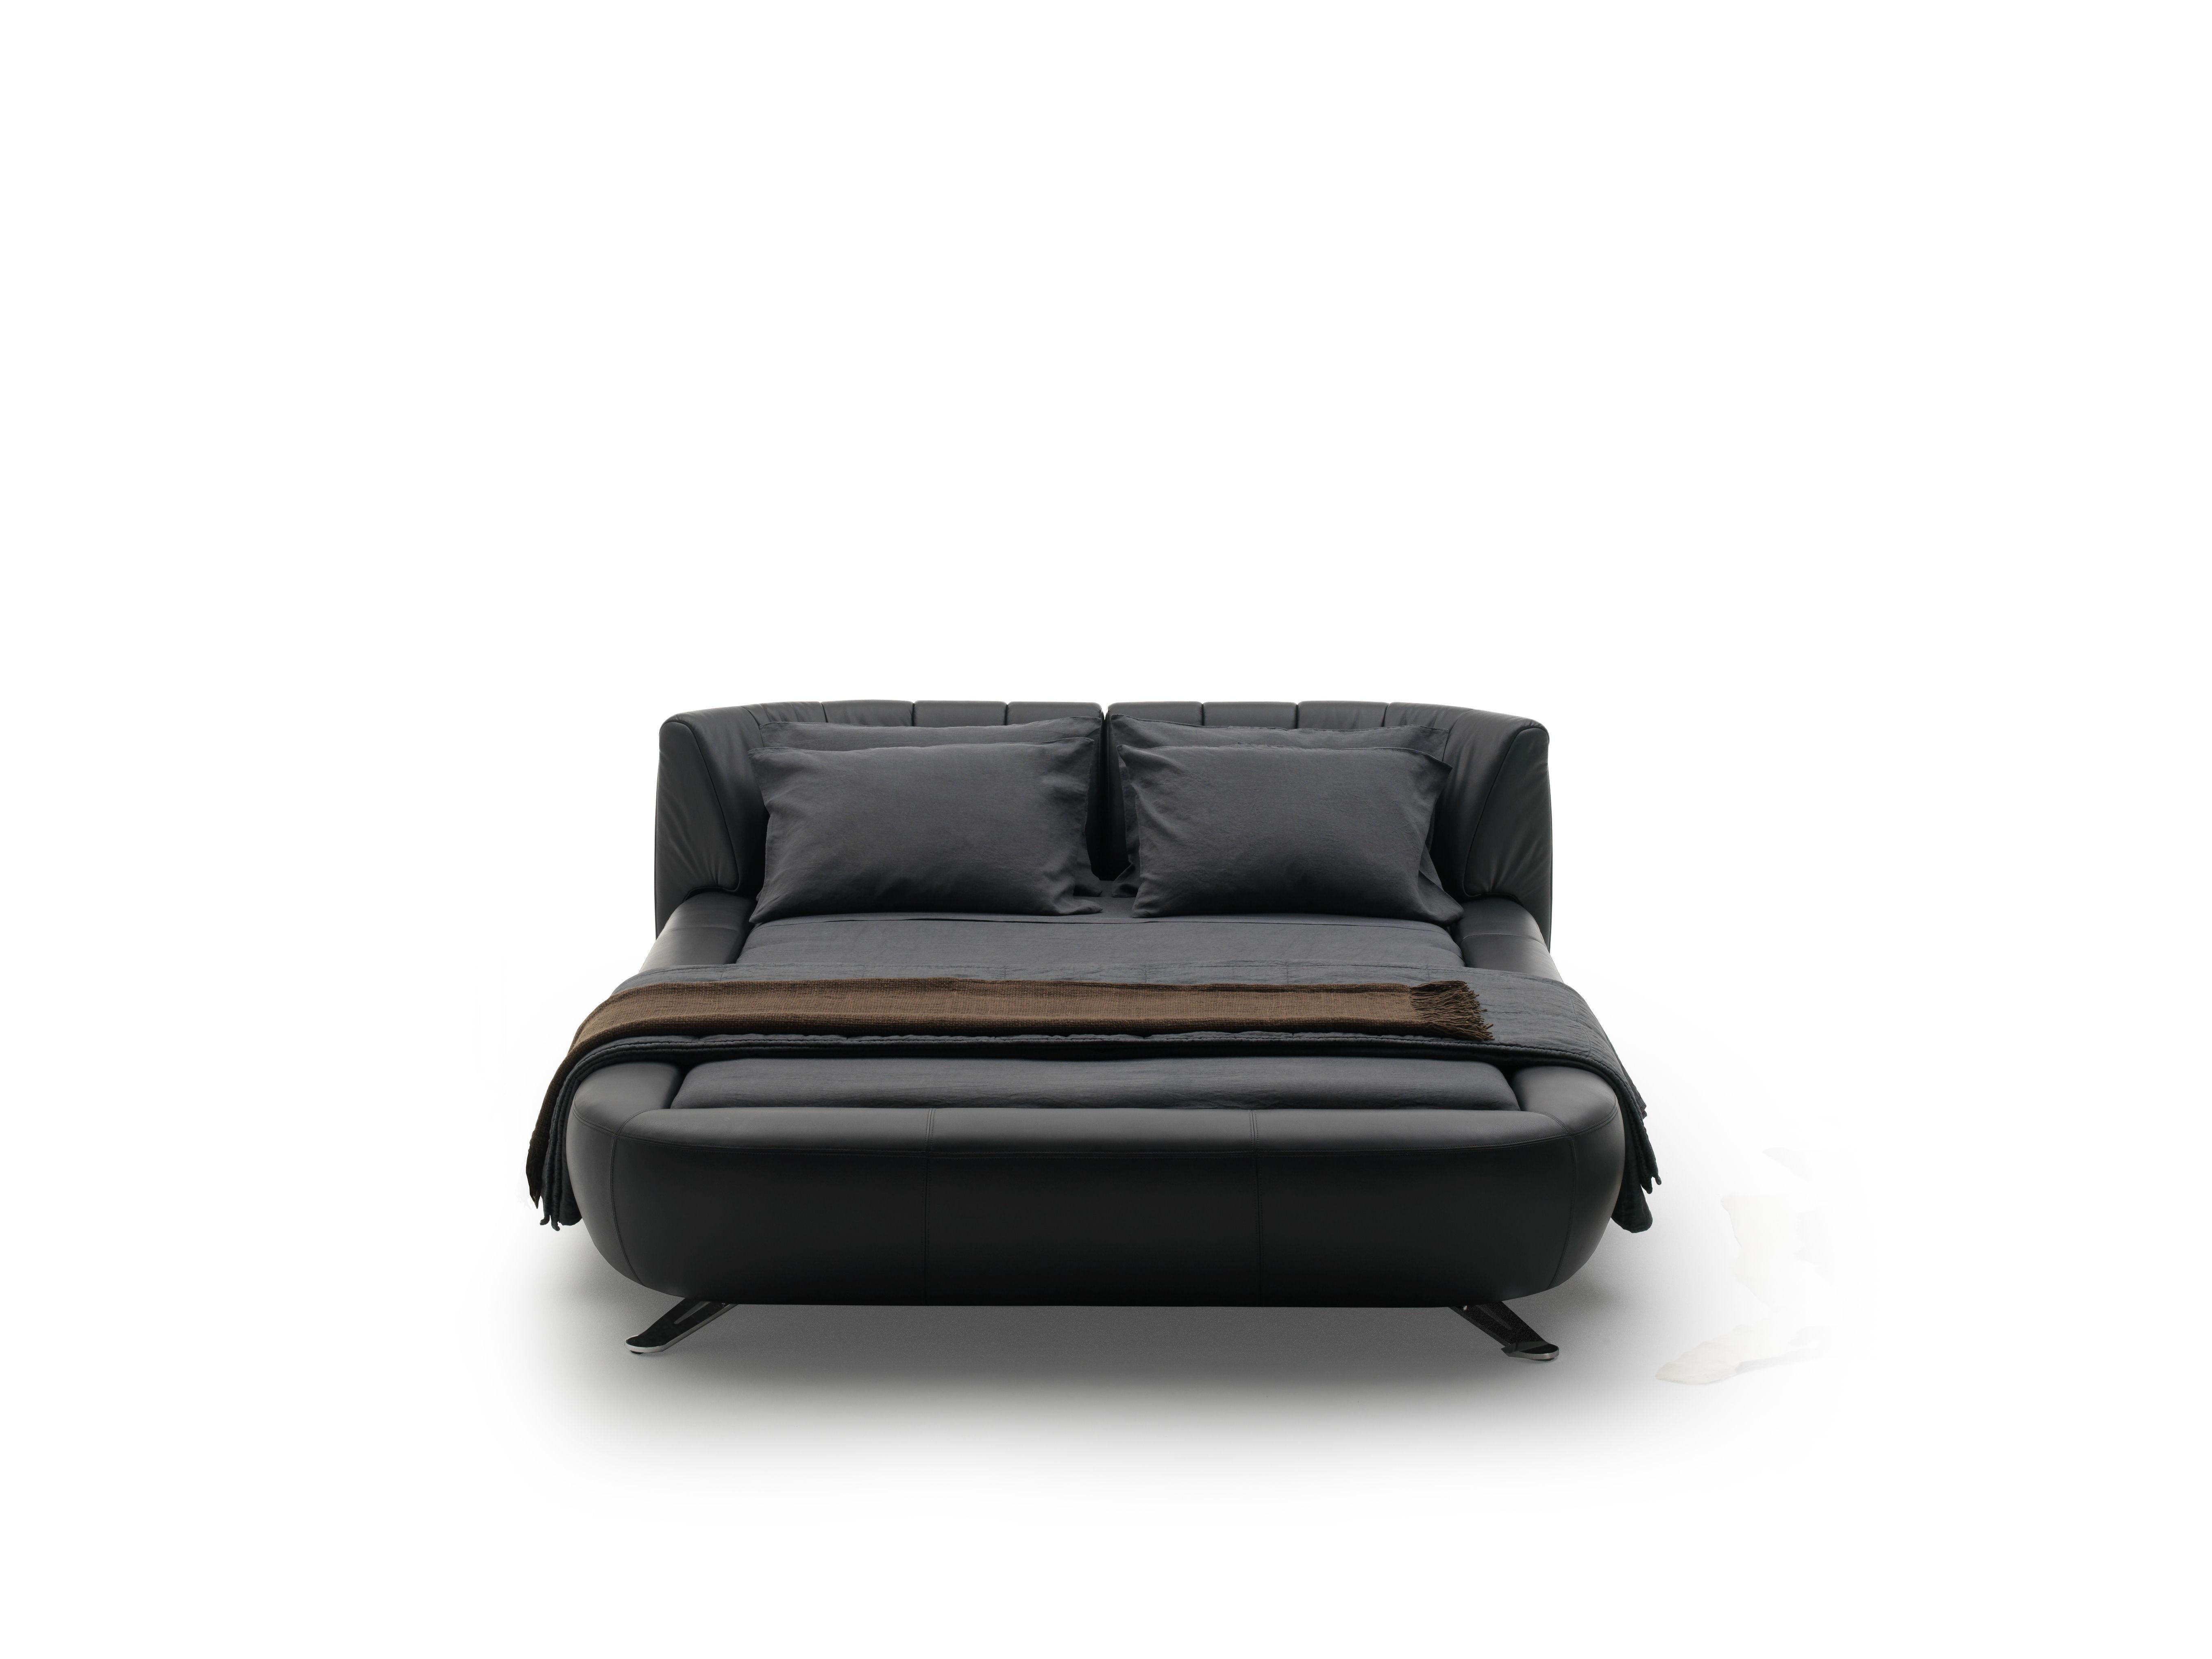 DS-1164 bed by De Sede
Dimensions: D 251 x W 202 x H 47 cm
Materials: metal construction, leather

Prices may change according to the chosen materials and size. 

Playful design for sensual moments

Backrests can be easily and quickly moved